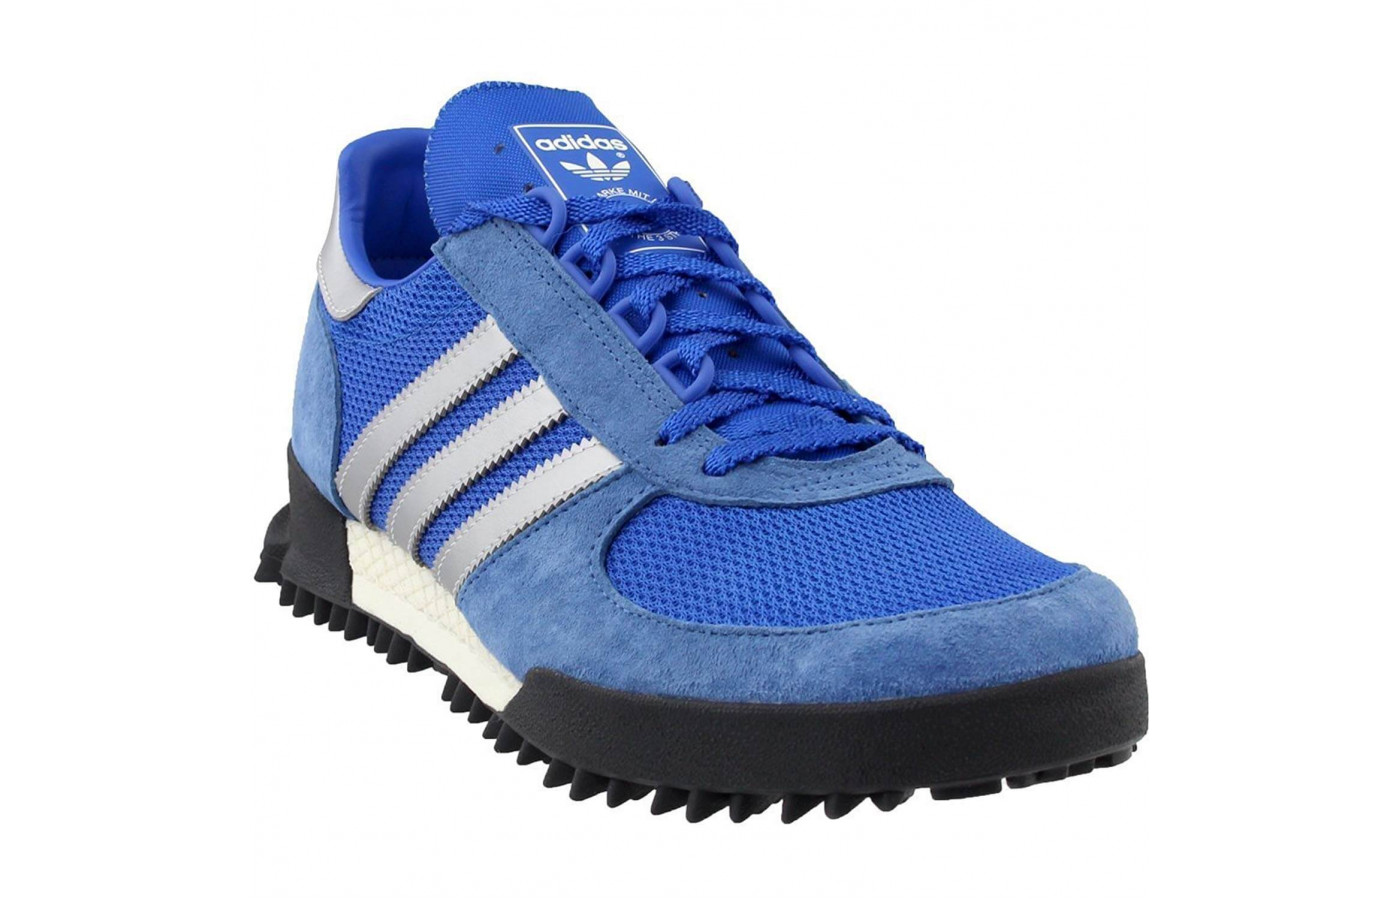 Adidas Marathon TR comes in royal blue and base green